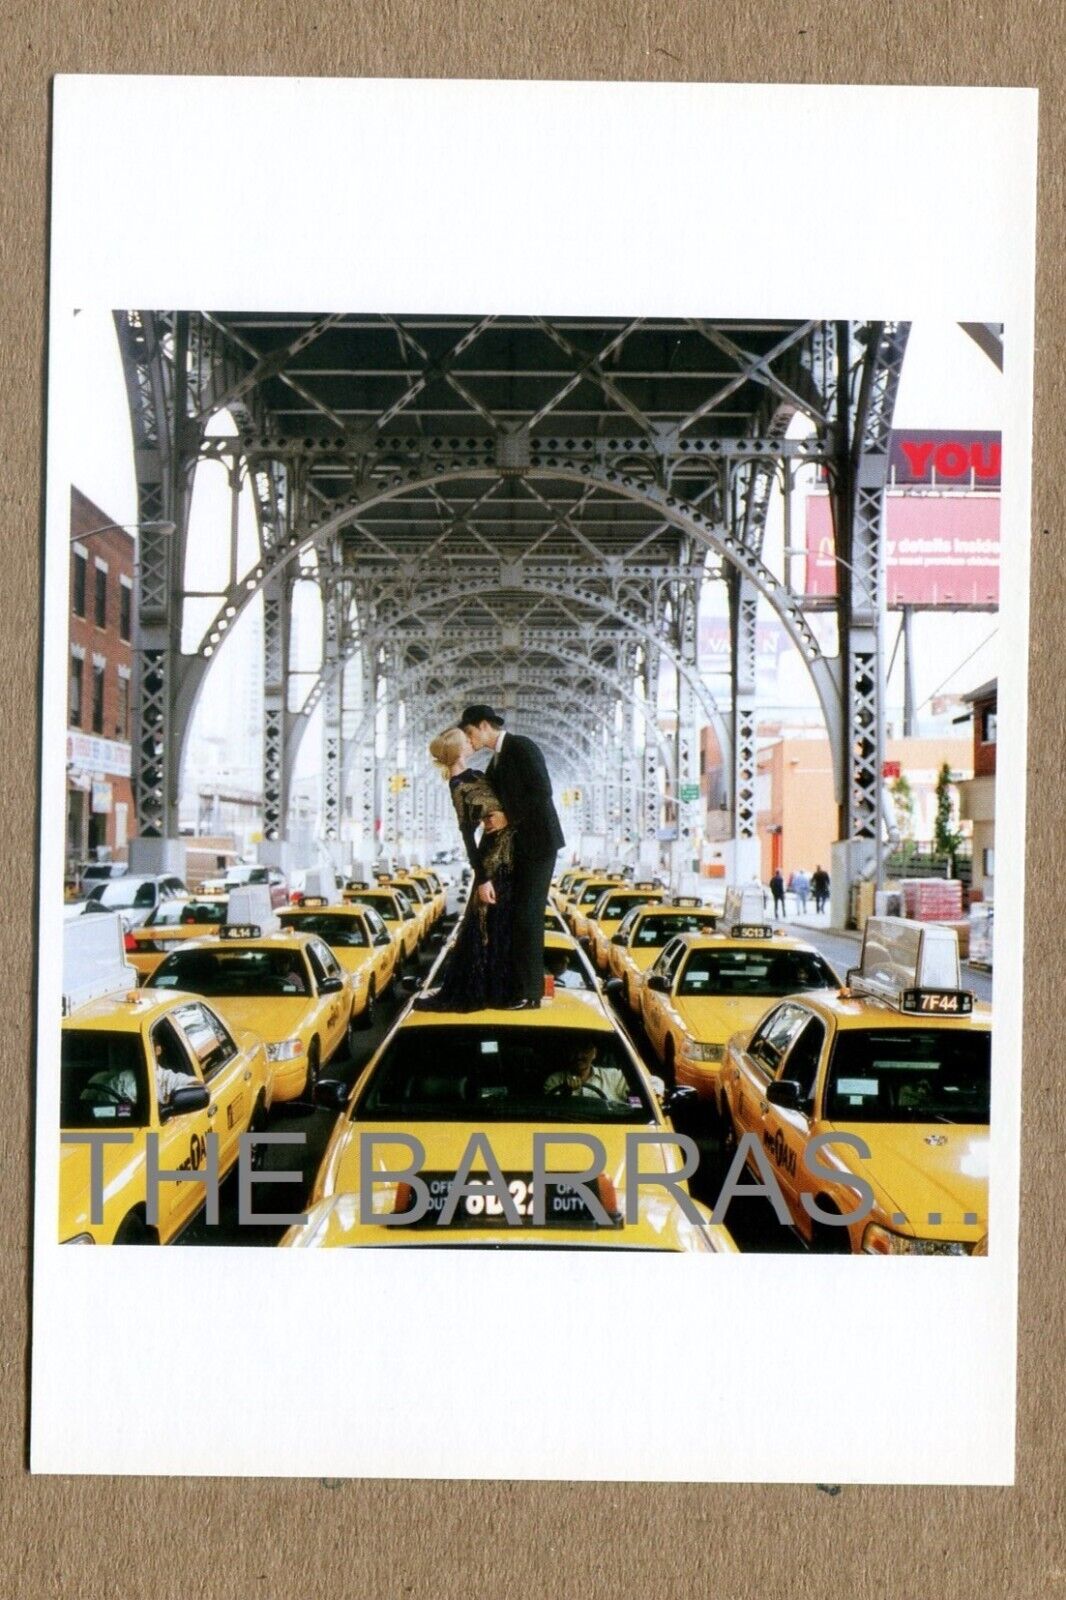 RODNEY SMITH, Edythe & Andrew Kissing on top of Taxis, NEW YORK. 2008 POSTCARD